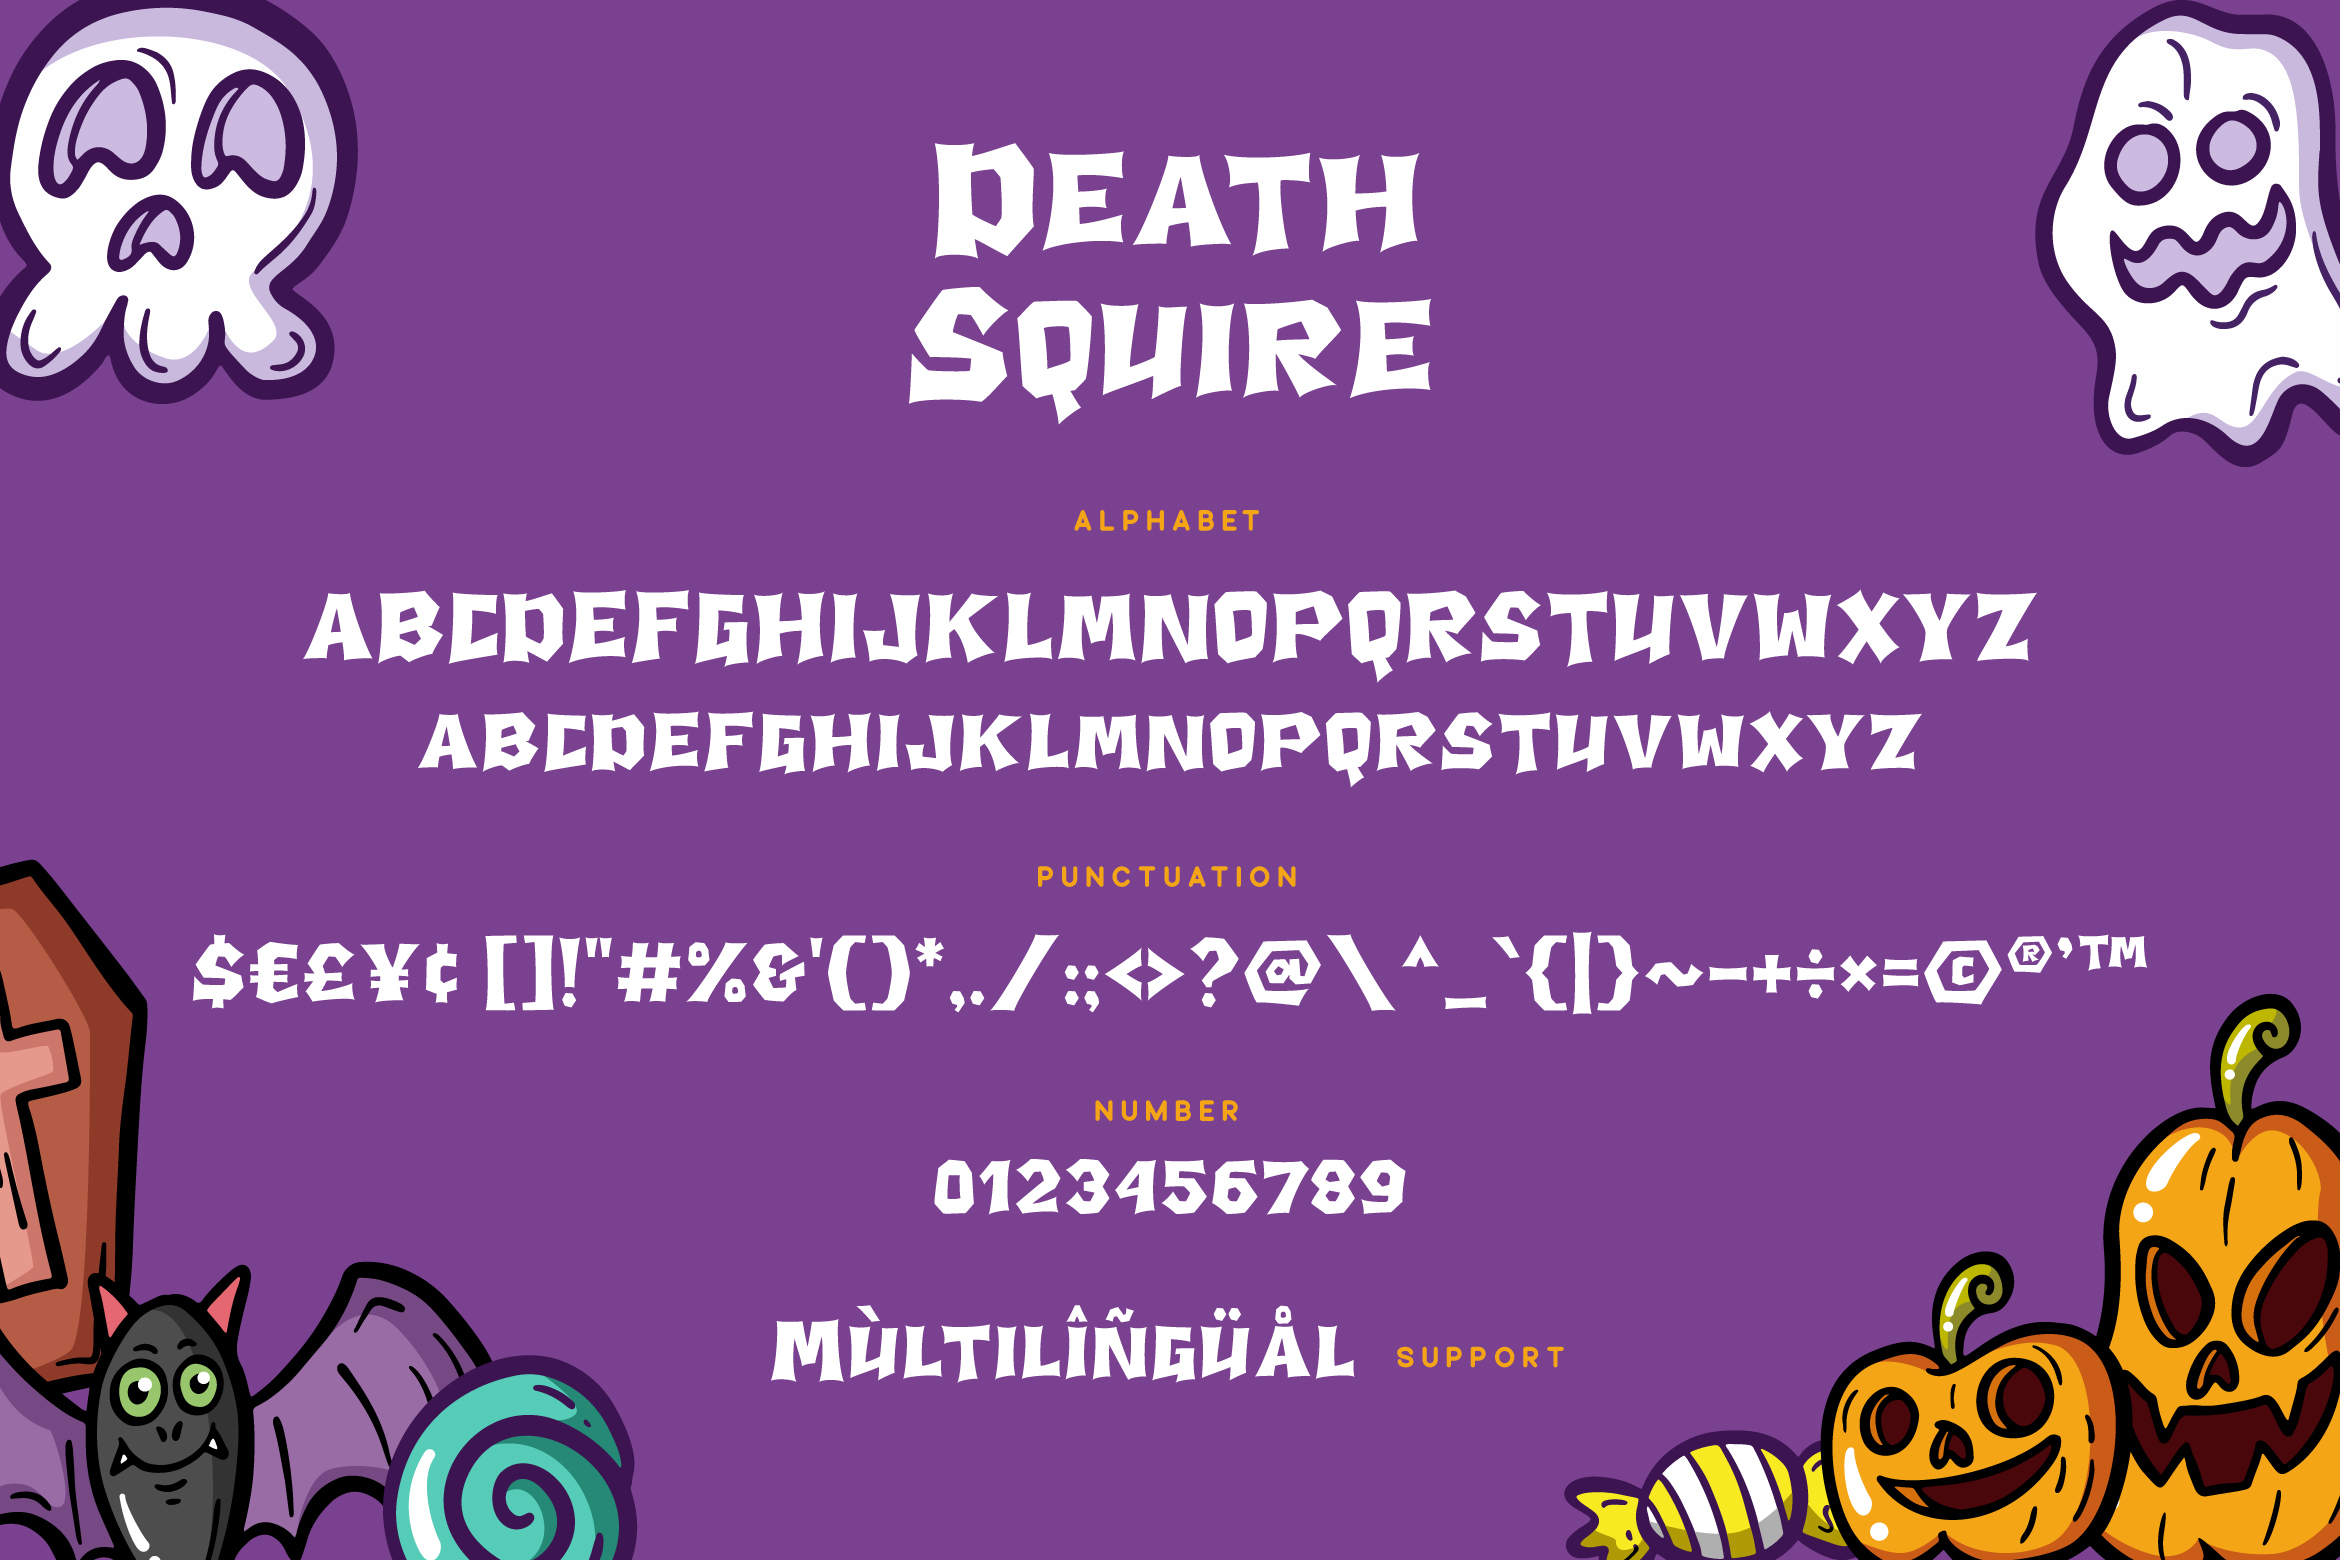 Death Squire